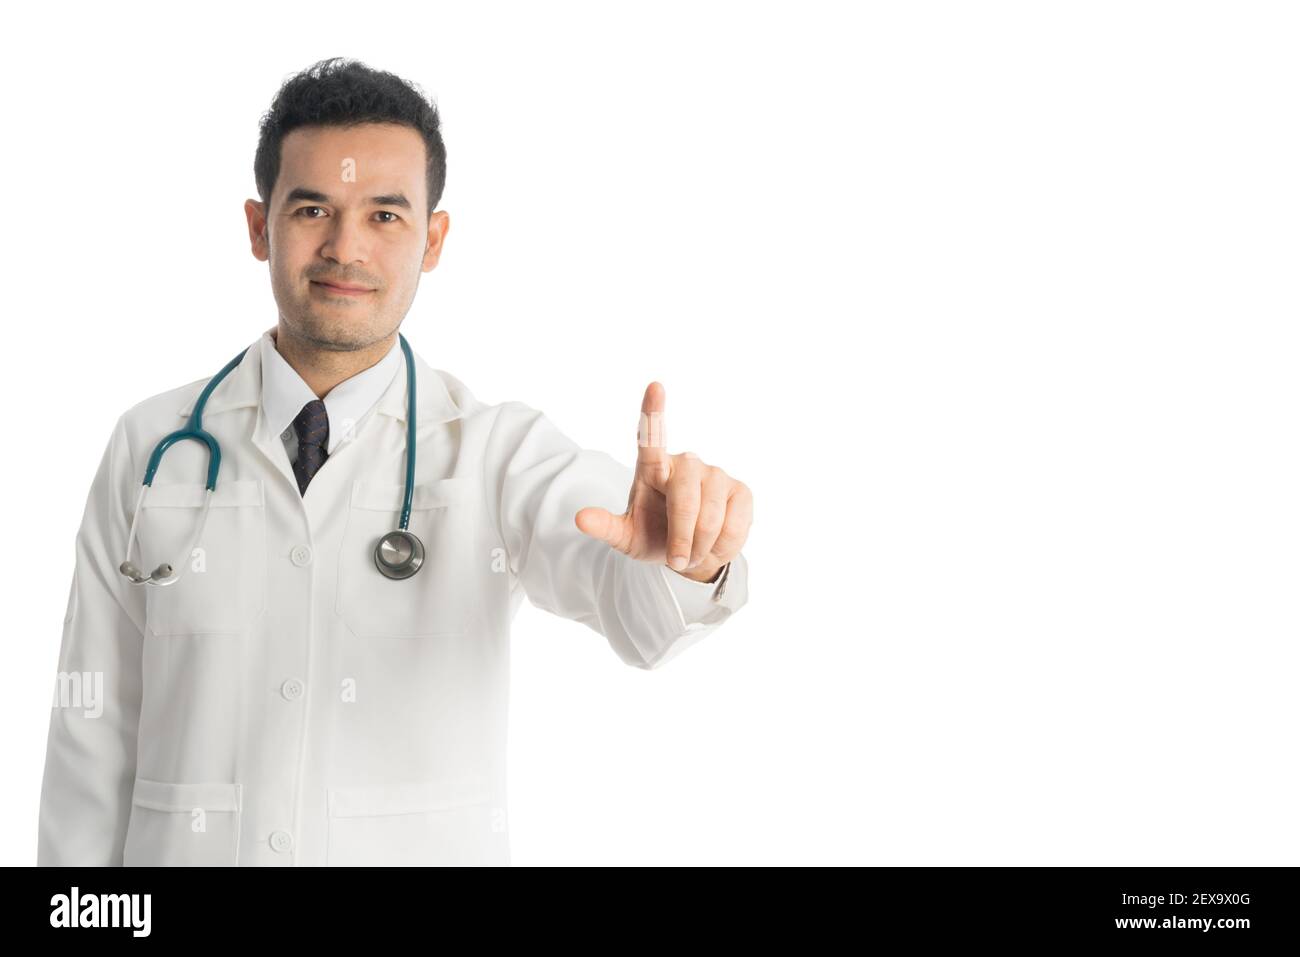 Isolated image of male doctor pointing finger at copy space, isolated on white background. Medical concept. Stock Photo